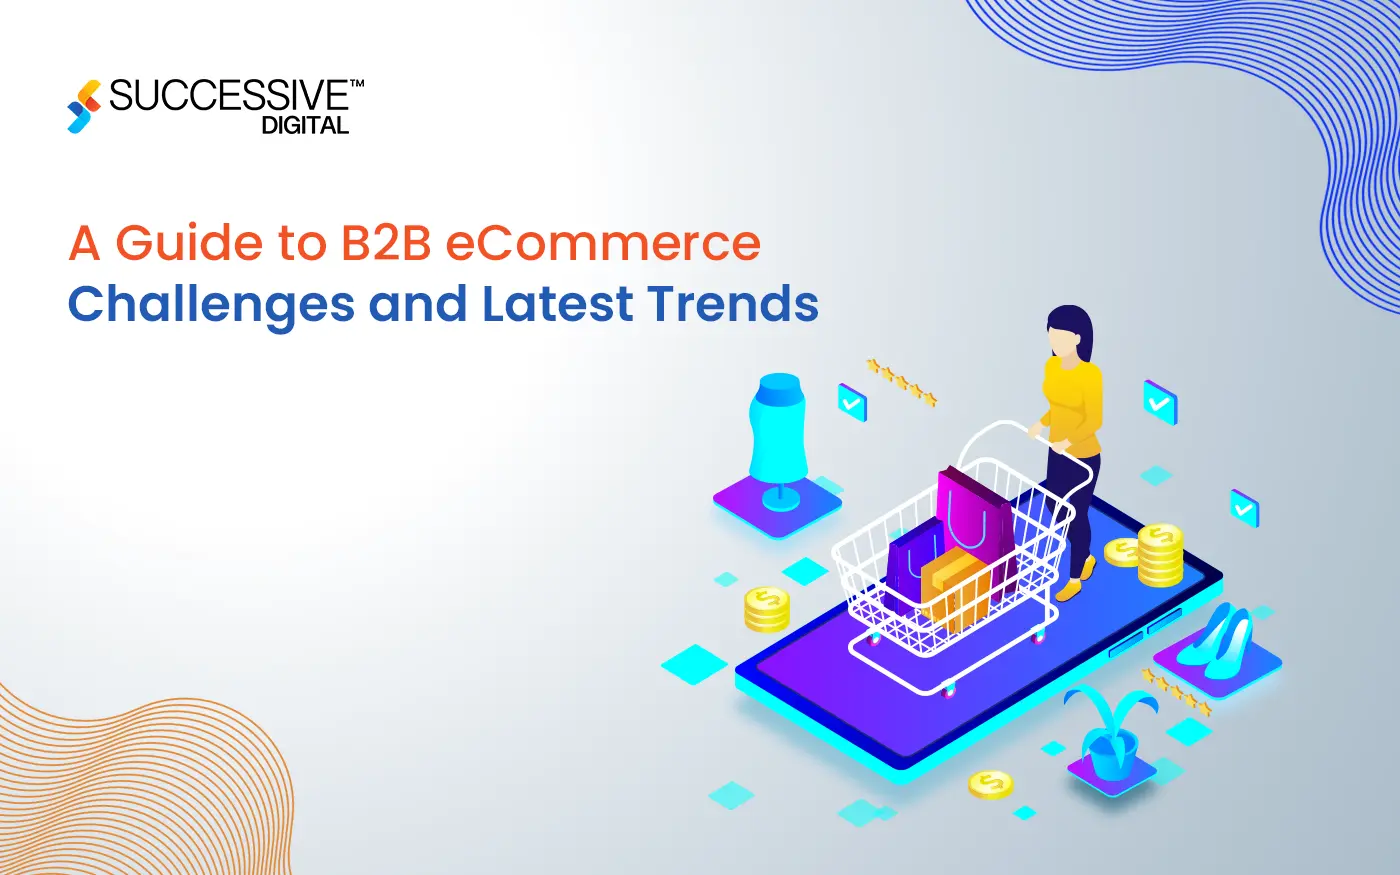 A Guide to B2B eCommerce Challenges and Latest Trends